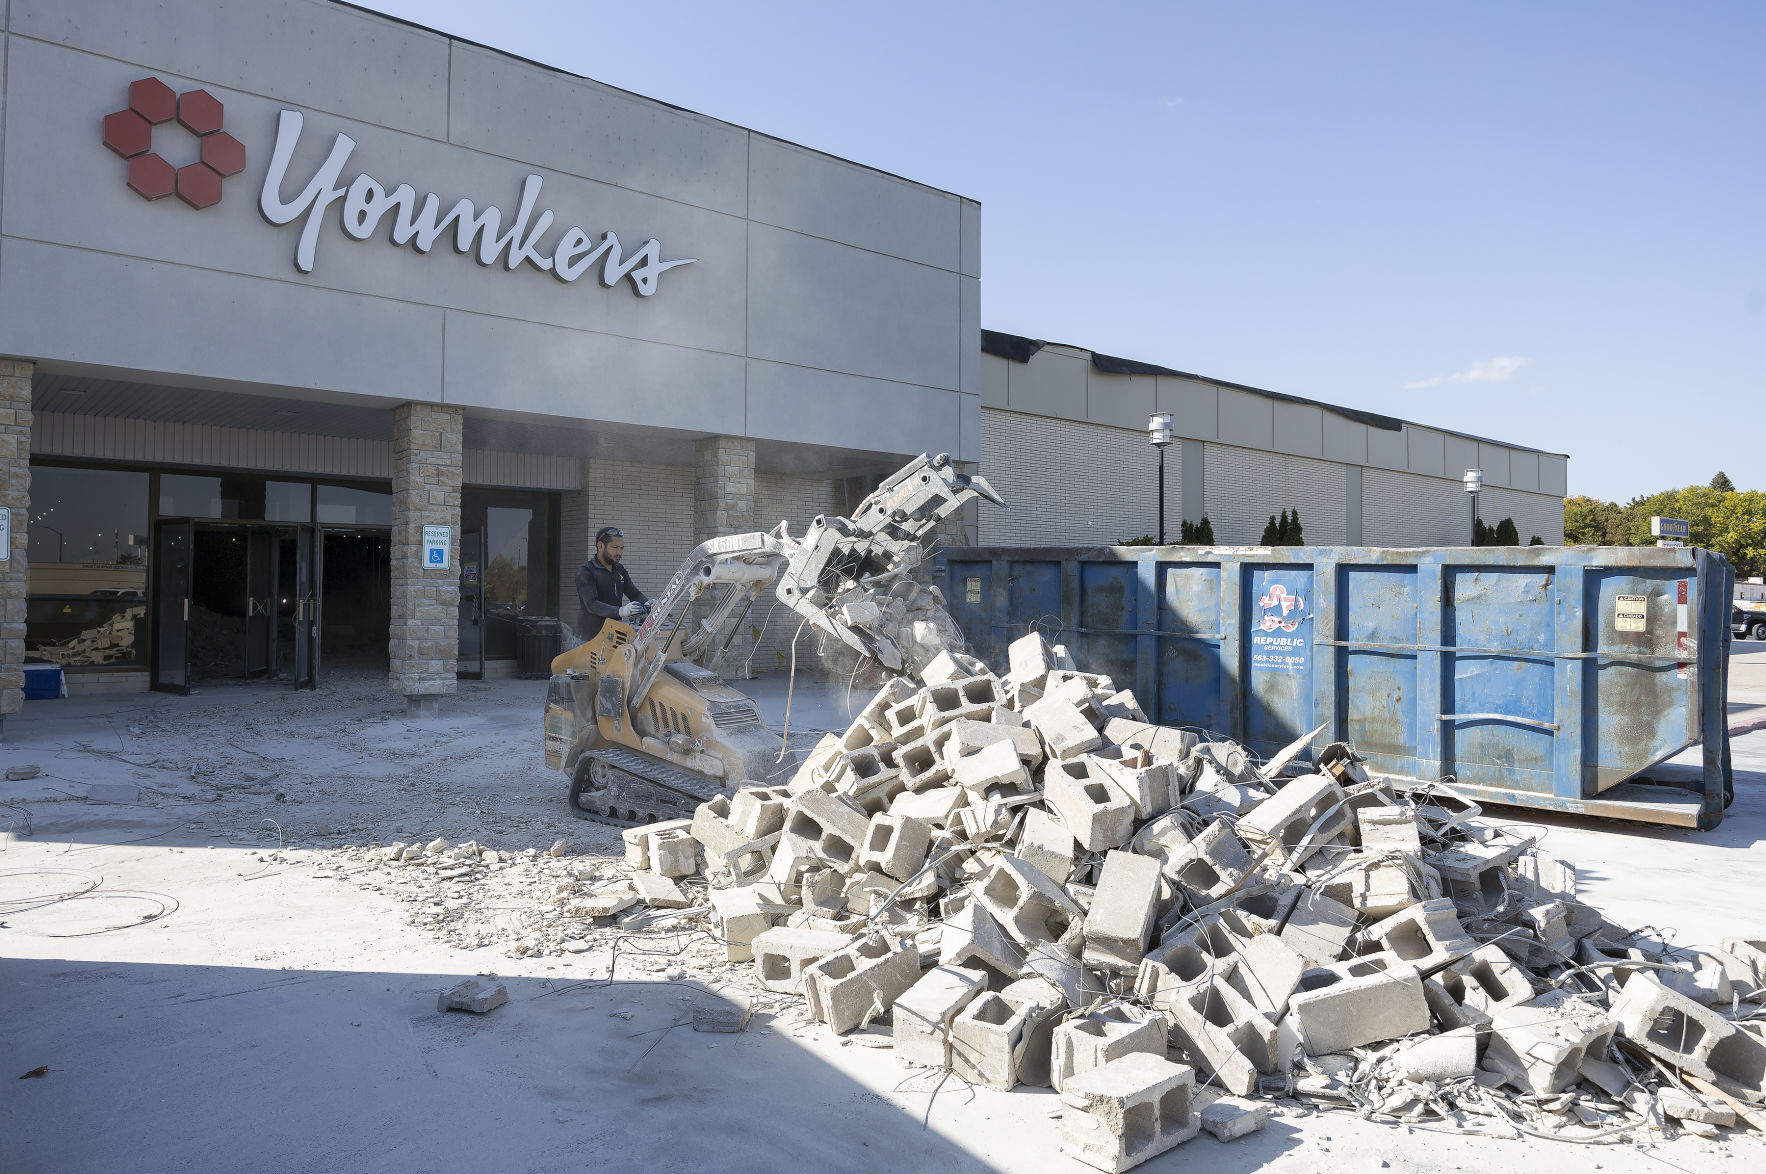 Construction crews work on clearing out the former Younkers store at Kennedy Mall in Dubuque on Monday.    PHOTO CREDIT: Stephen Gassman